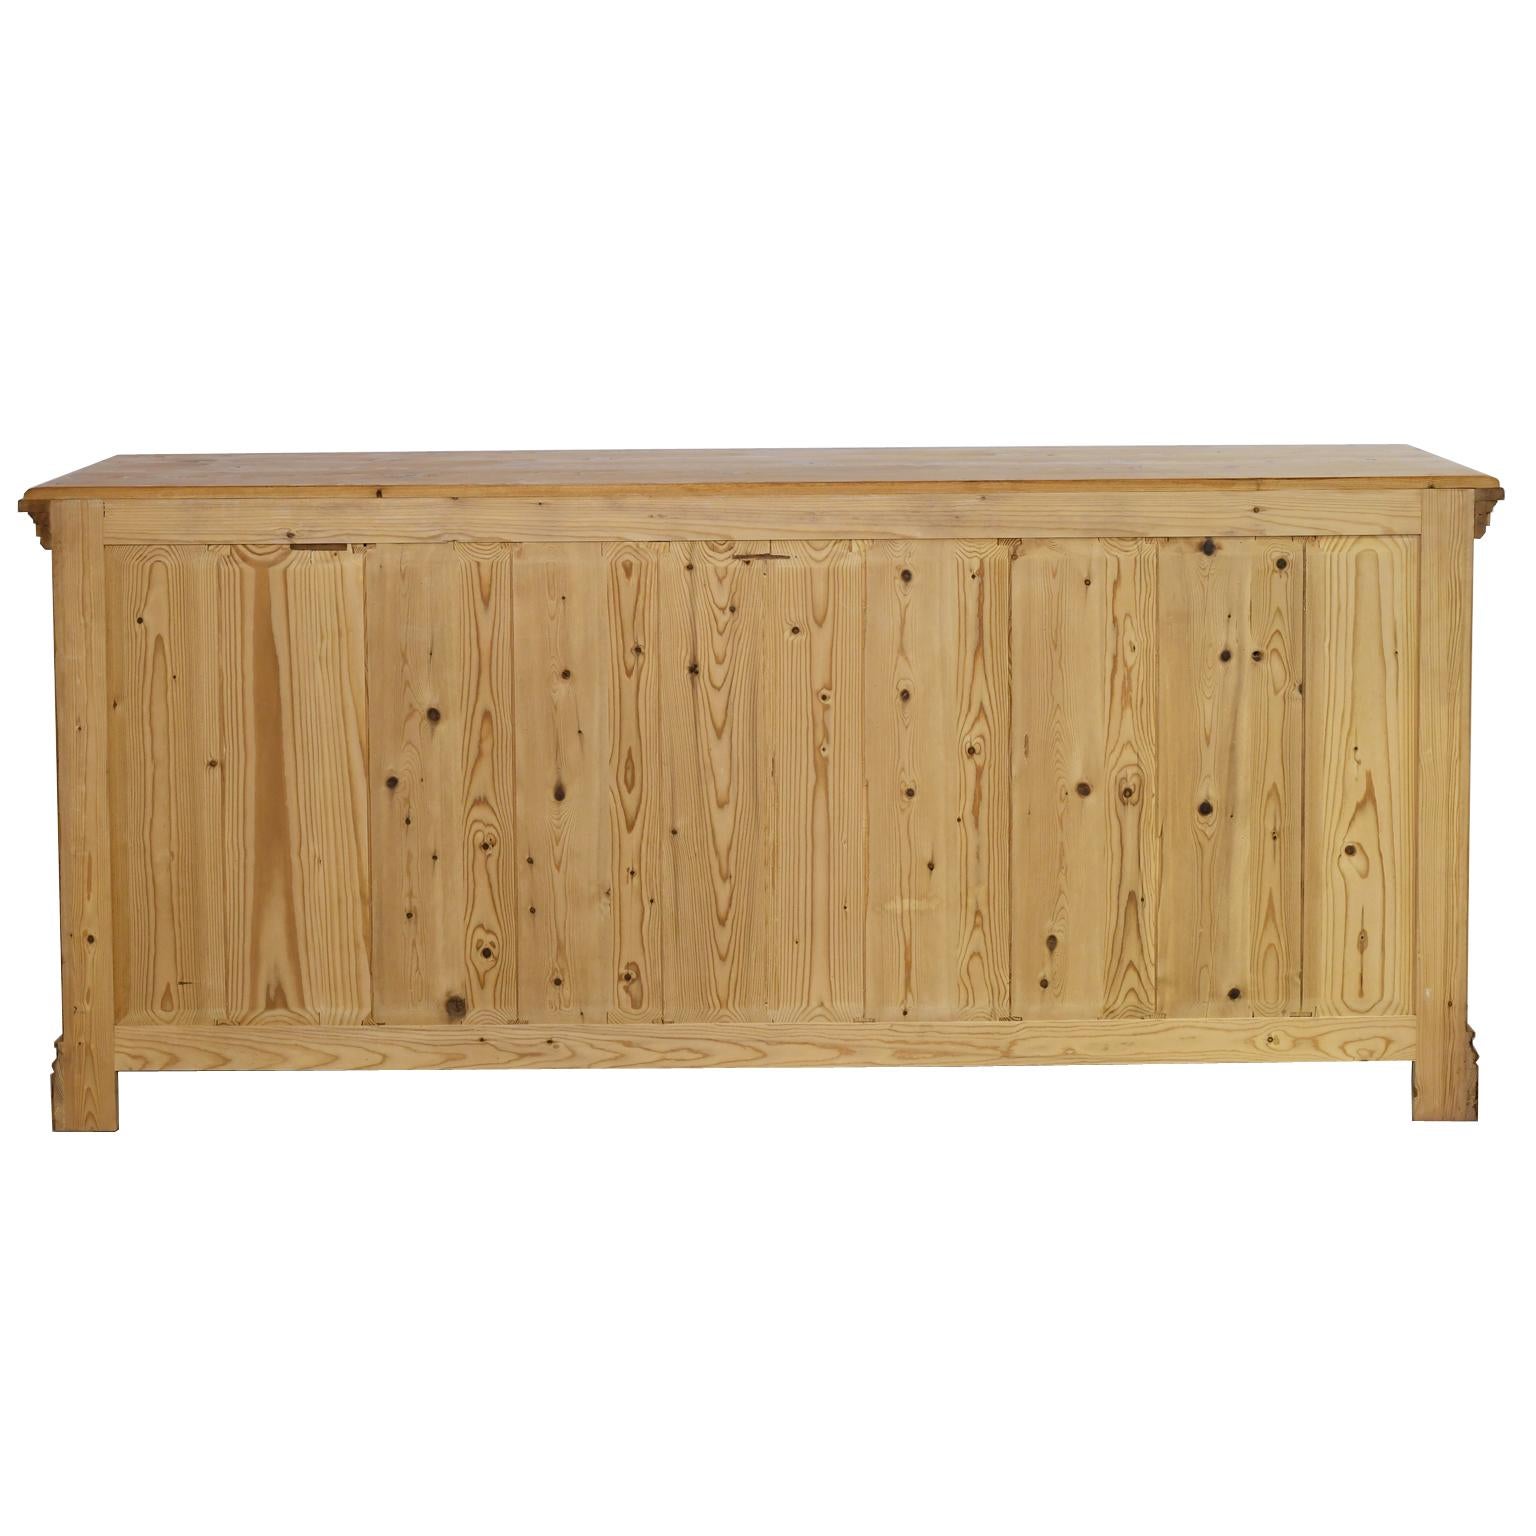 Hand-Crafted Bonnin Ashley Custom-Made English-Style Sideboard / Credenza in Repurposed Pine For Sale